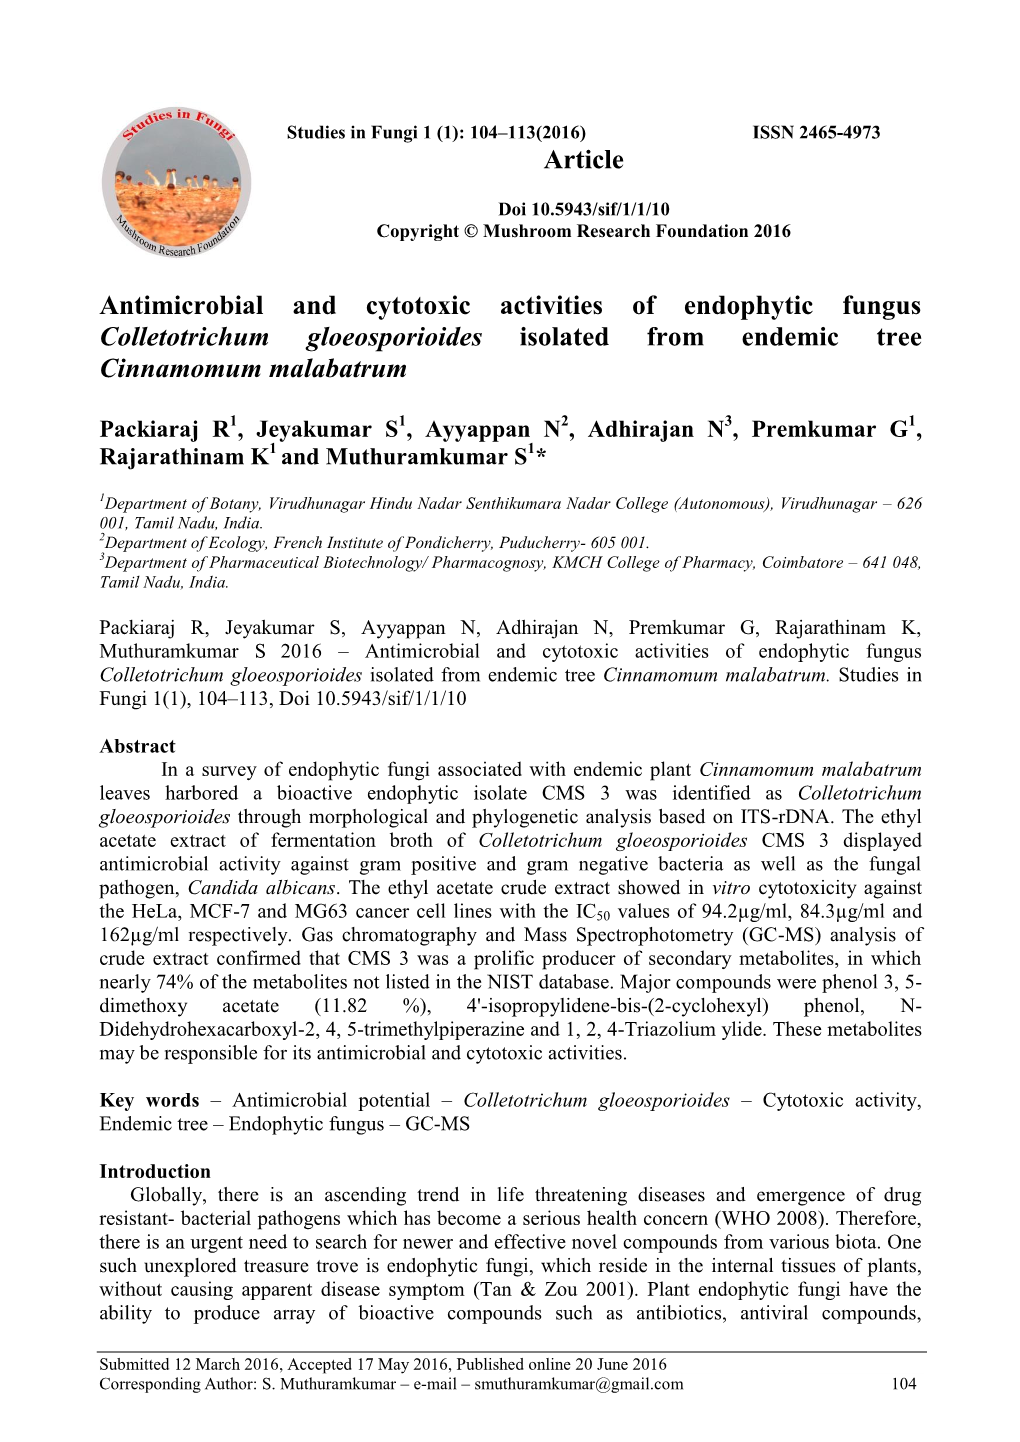 Antimicrobial and Cytotoxic Activities of Endophytic Fungus Colletotrichum Gloeosporioides Isolated from Endemic Tree Cinnamomum Malabatrum